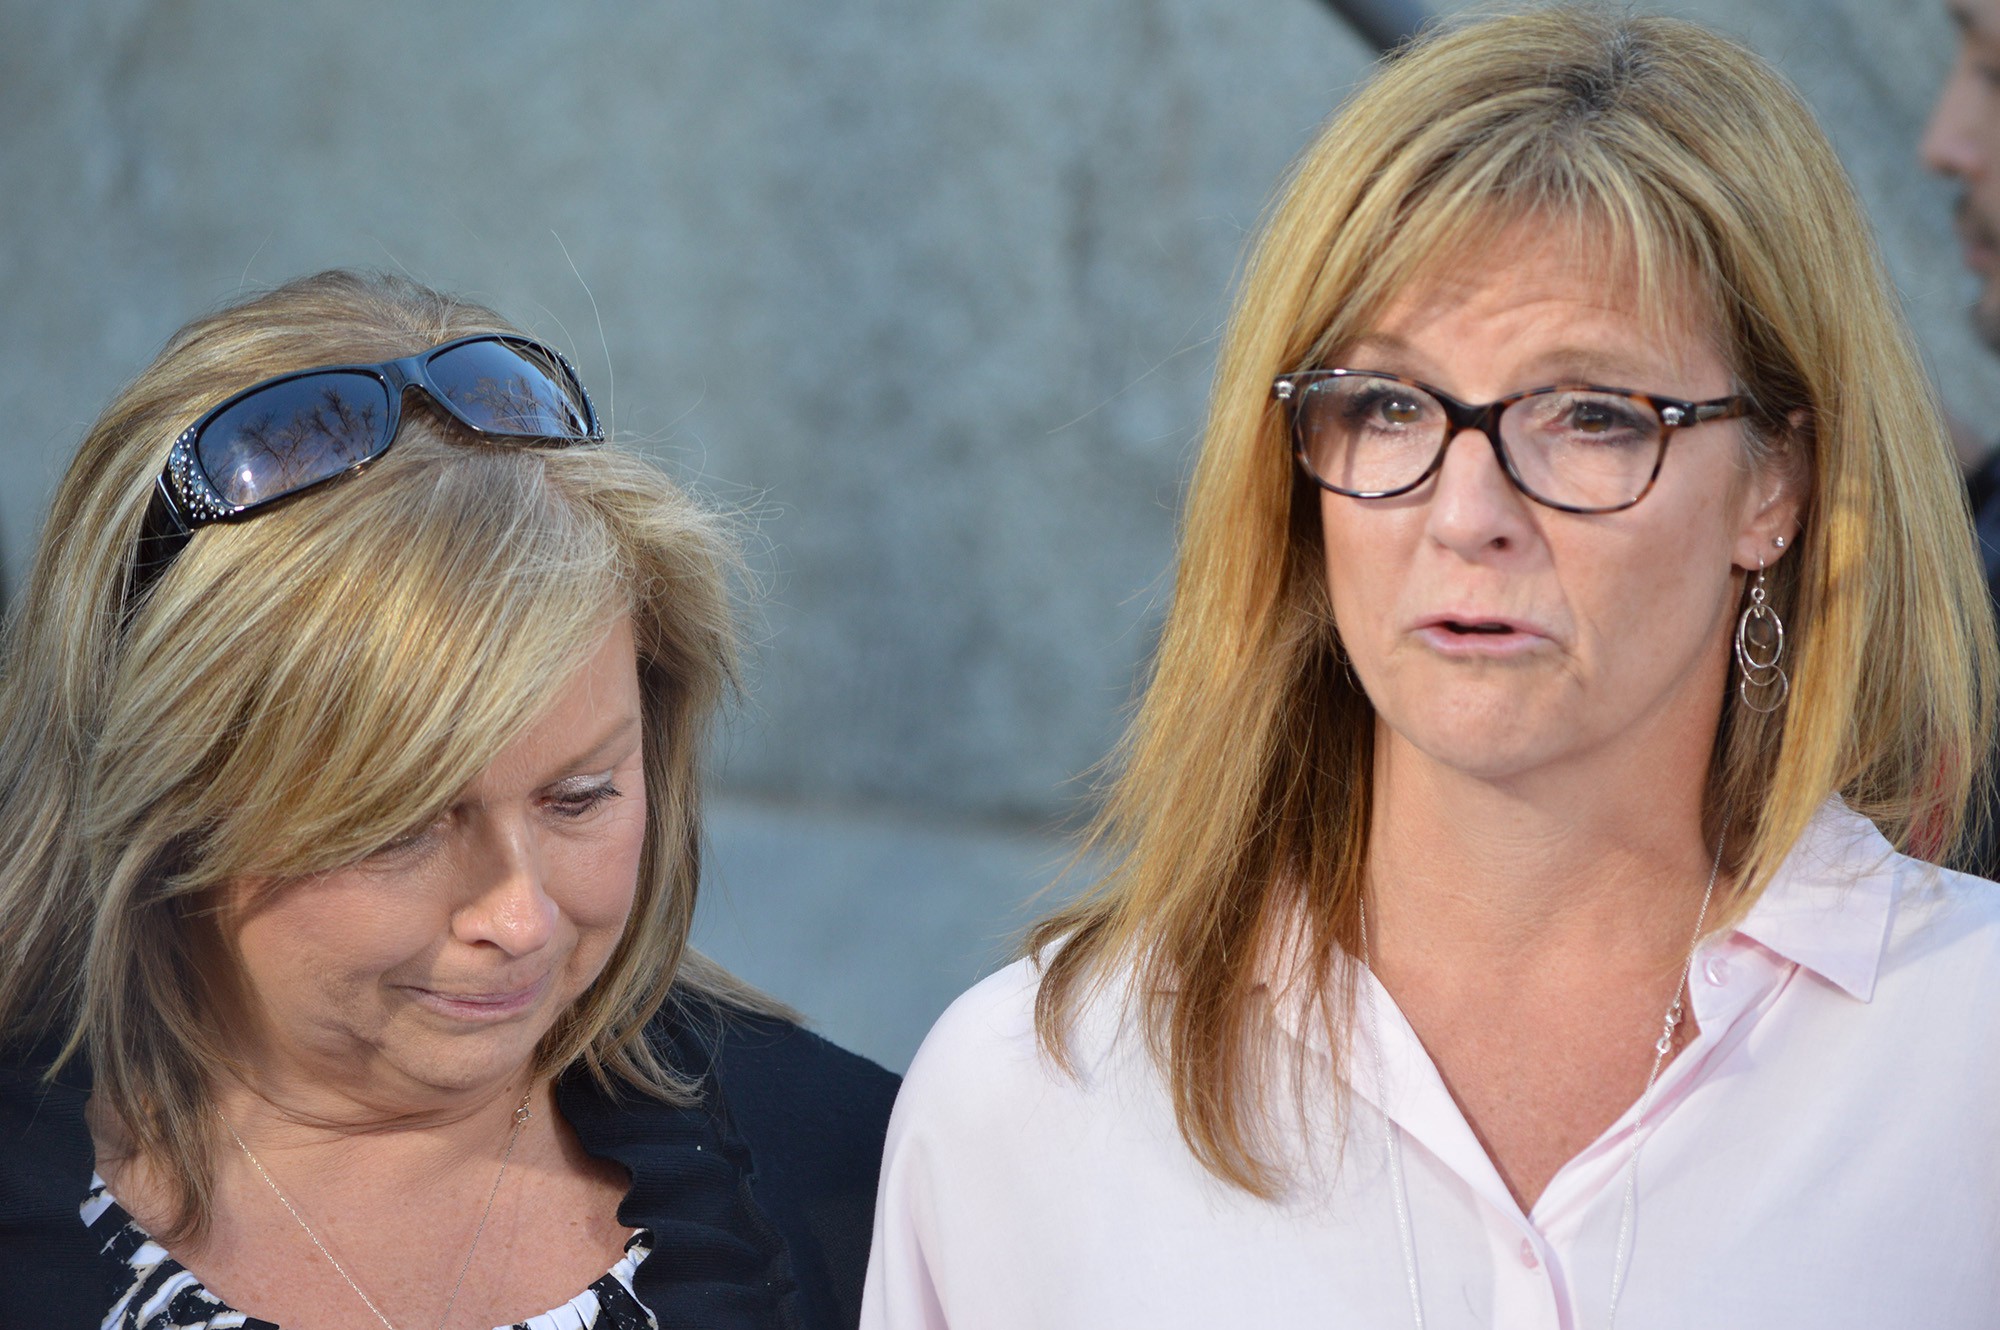 Lori Lyon, right, and Terri Crippes, aunts of Kayla Mueller, share a statement on behalf of the famiy at a news conference Tuesday in Prescott.